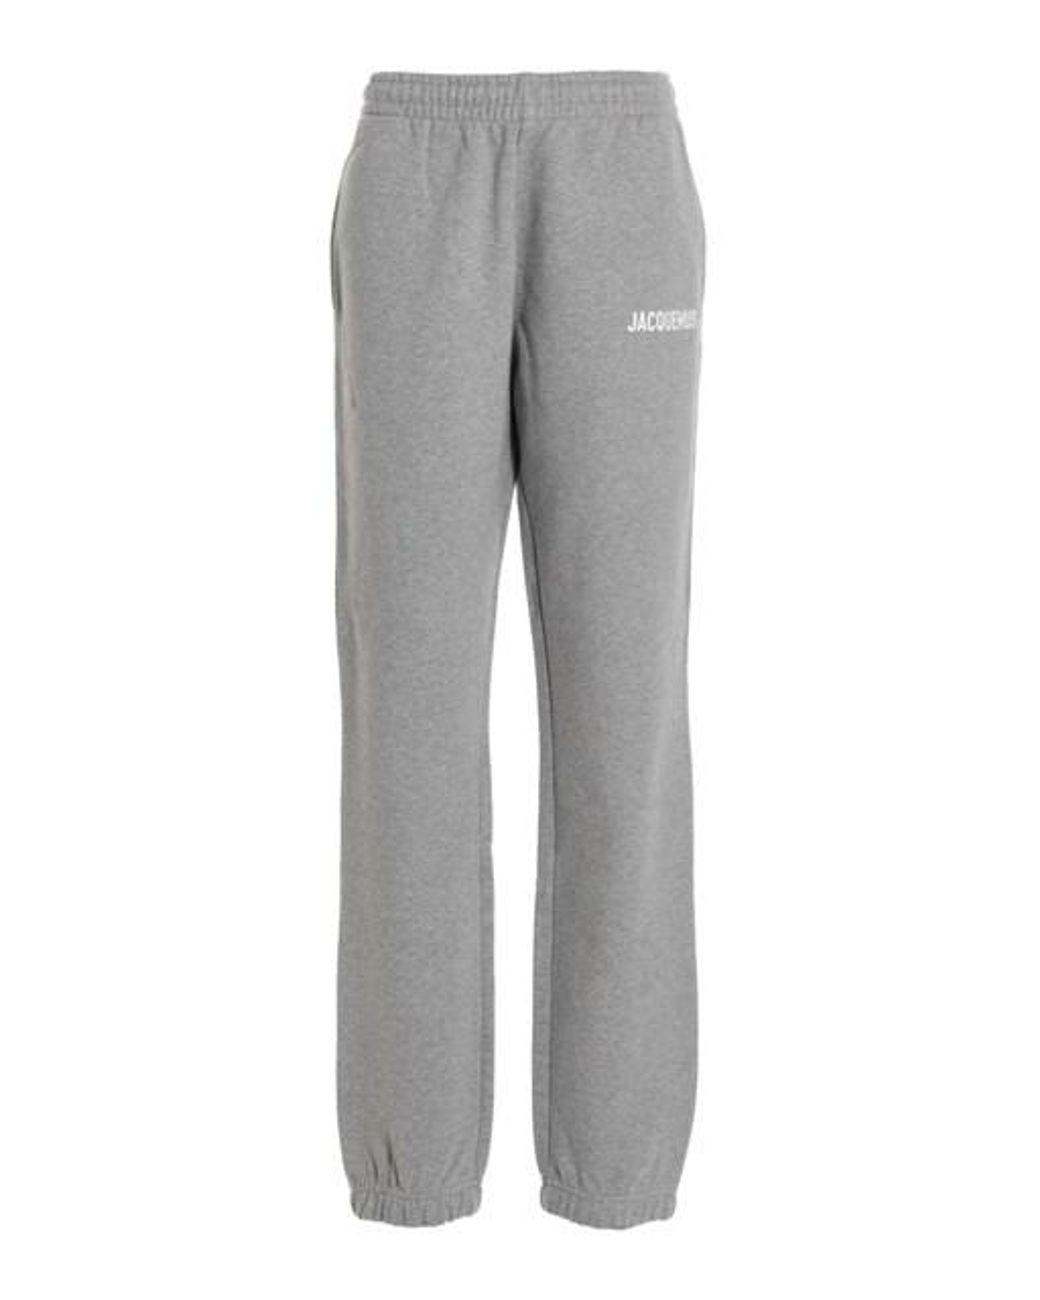 Jacquemus Logo Print joggers in Gray | Lyst